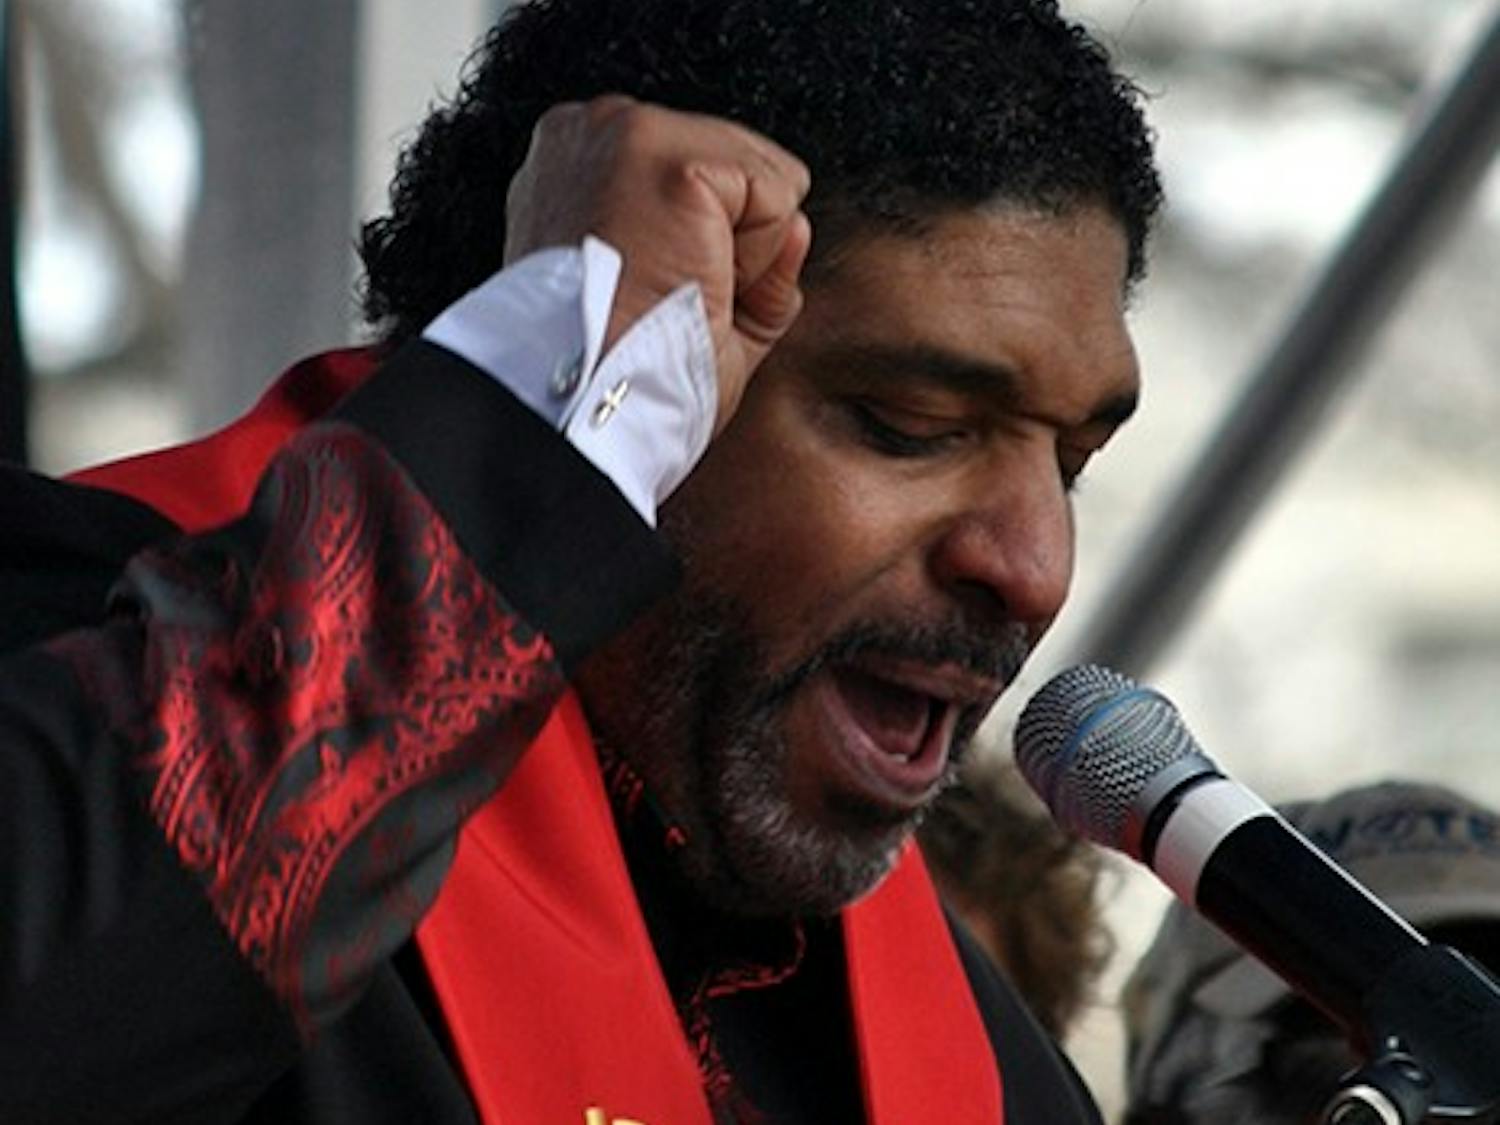 	N.C. NAACP President Rev. William Barber II addressed thousands of onlookers at the Moral March.